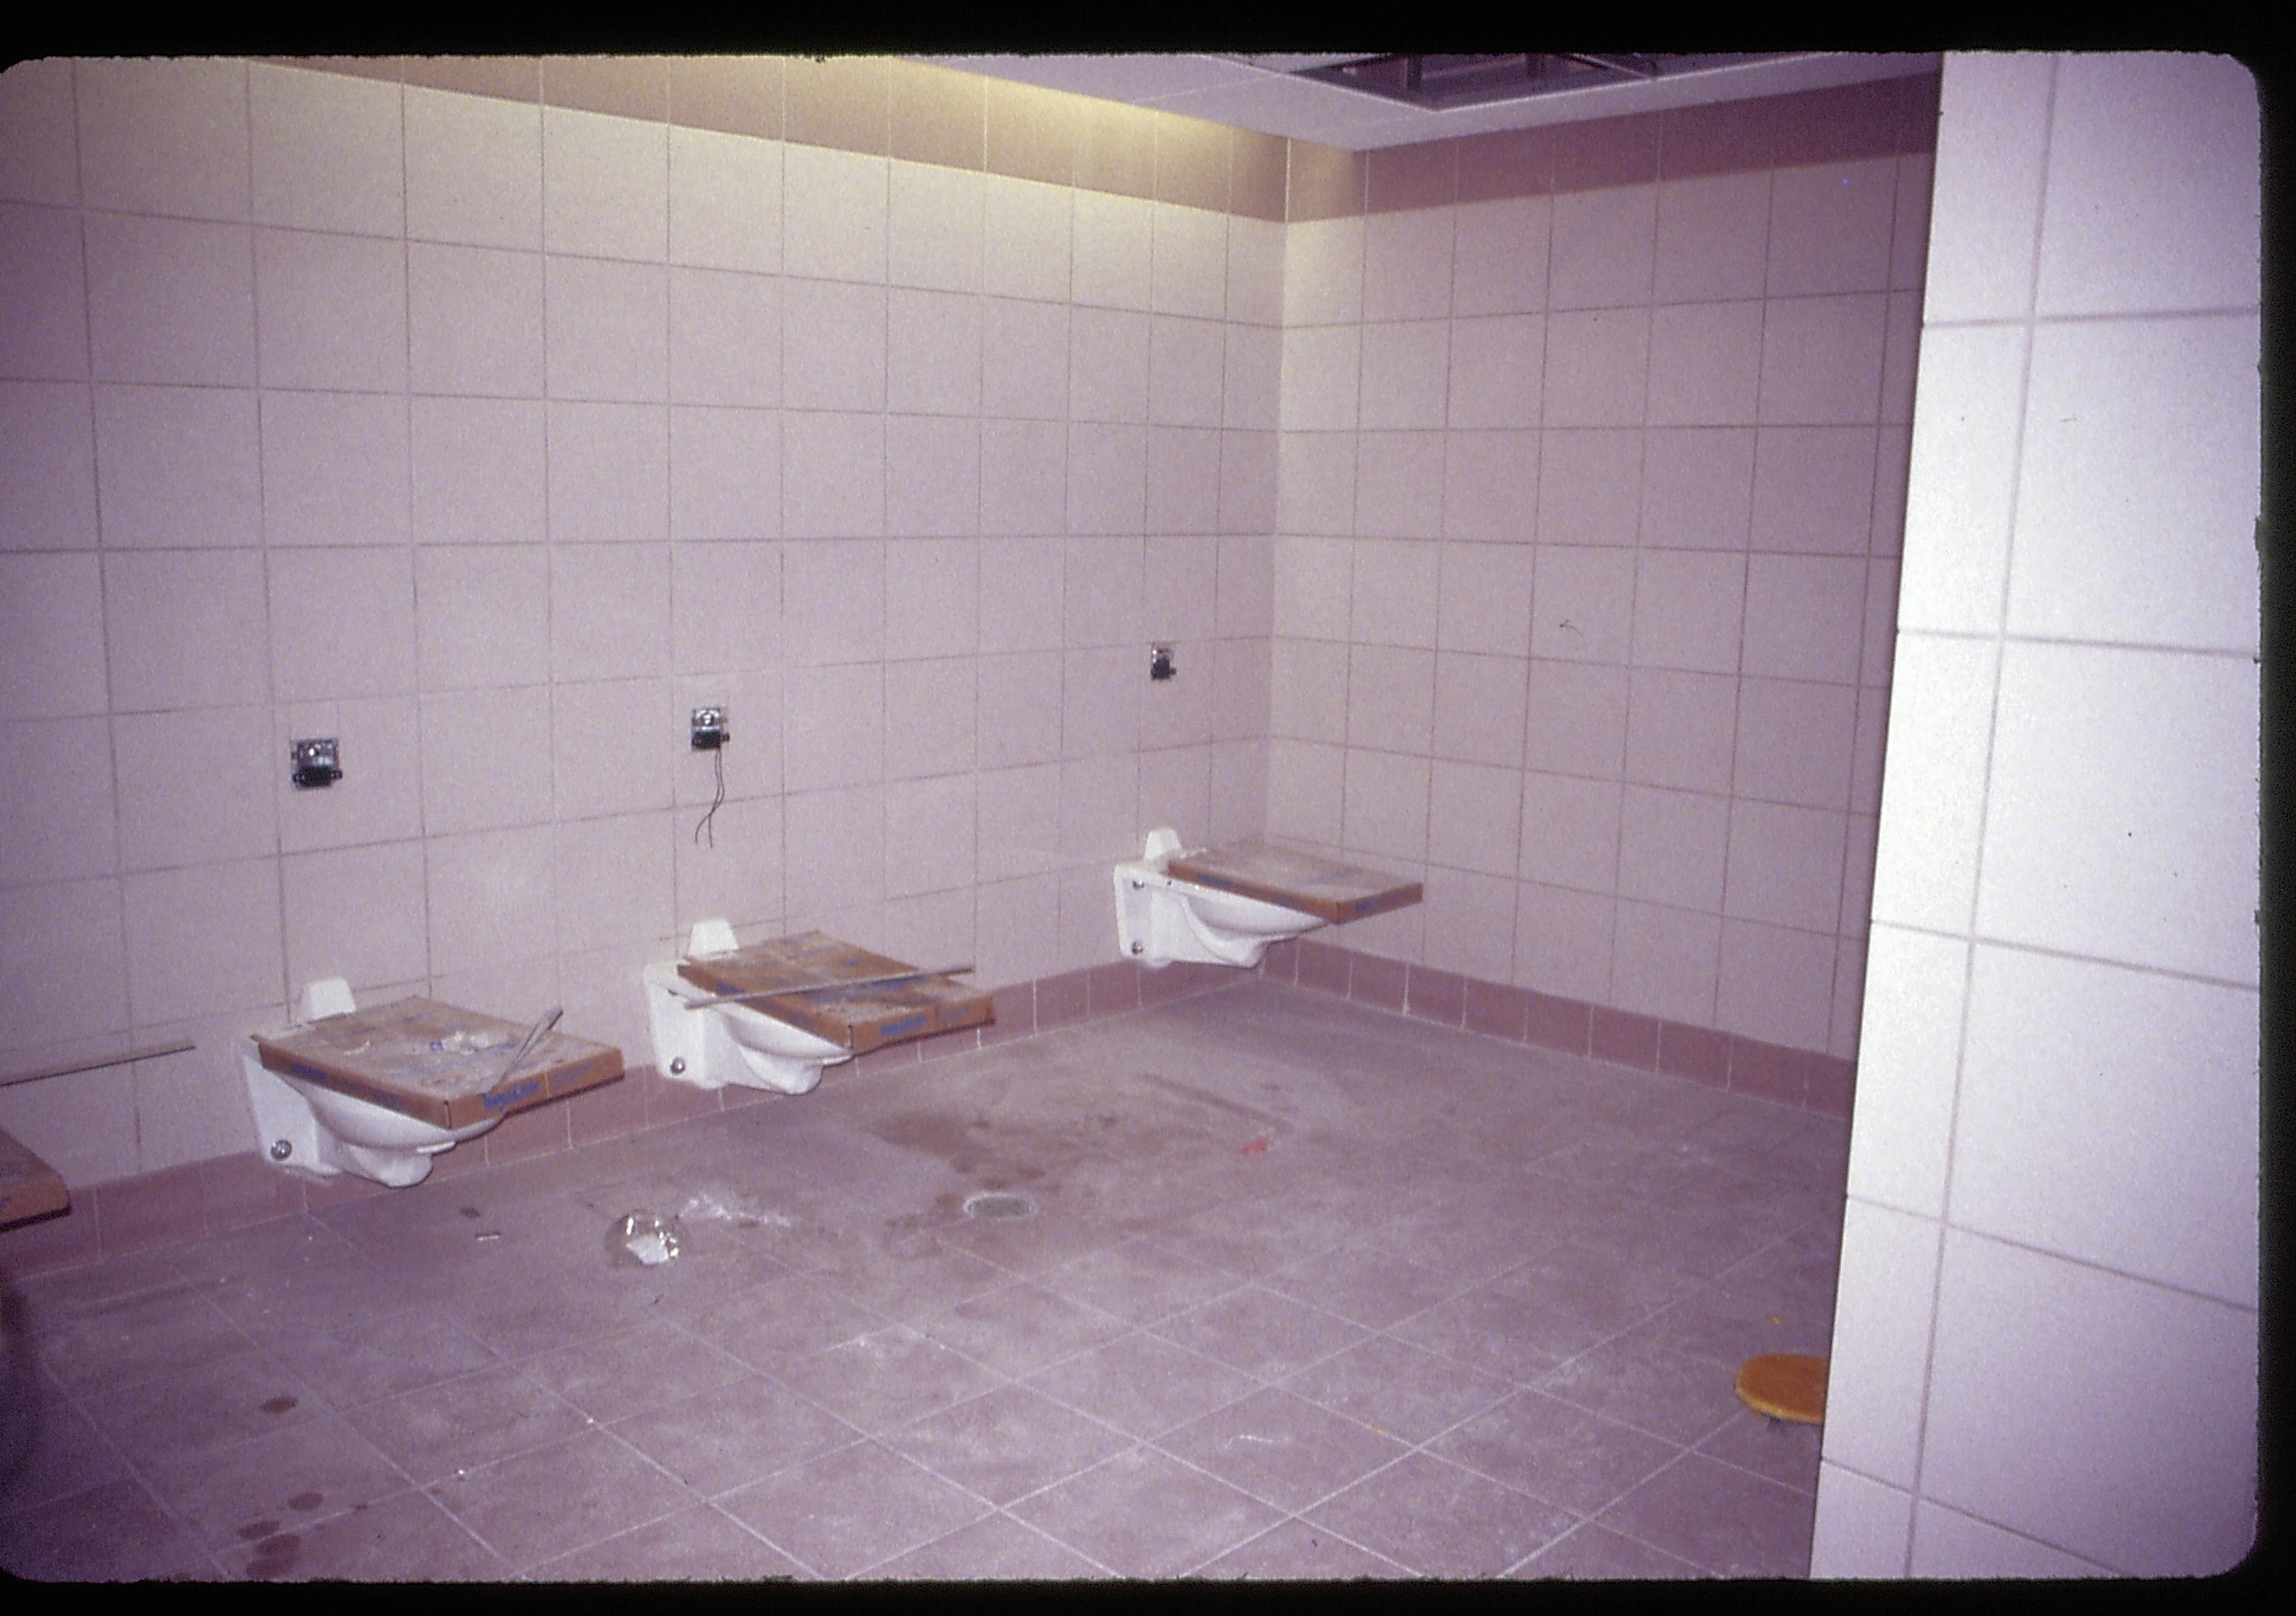 Visitor Center - remodeling. Toilets in Women's restroom before stalls installed. Tile walls and contrasting color tile floors and baseboard visible. Toilet seats remain in cardboard shipping boxes on top of toilets. Looking Northwest from doorway of Women's restroom Visitor Center, remodel, restroom, toilets, tile